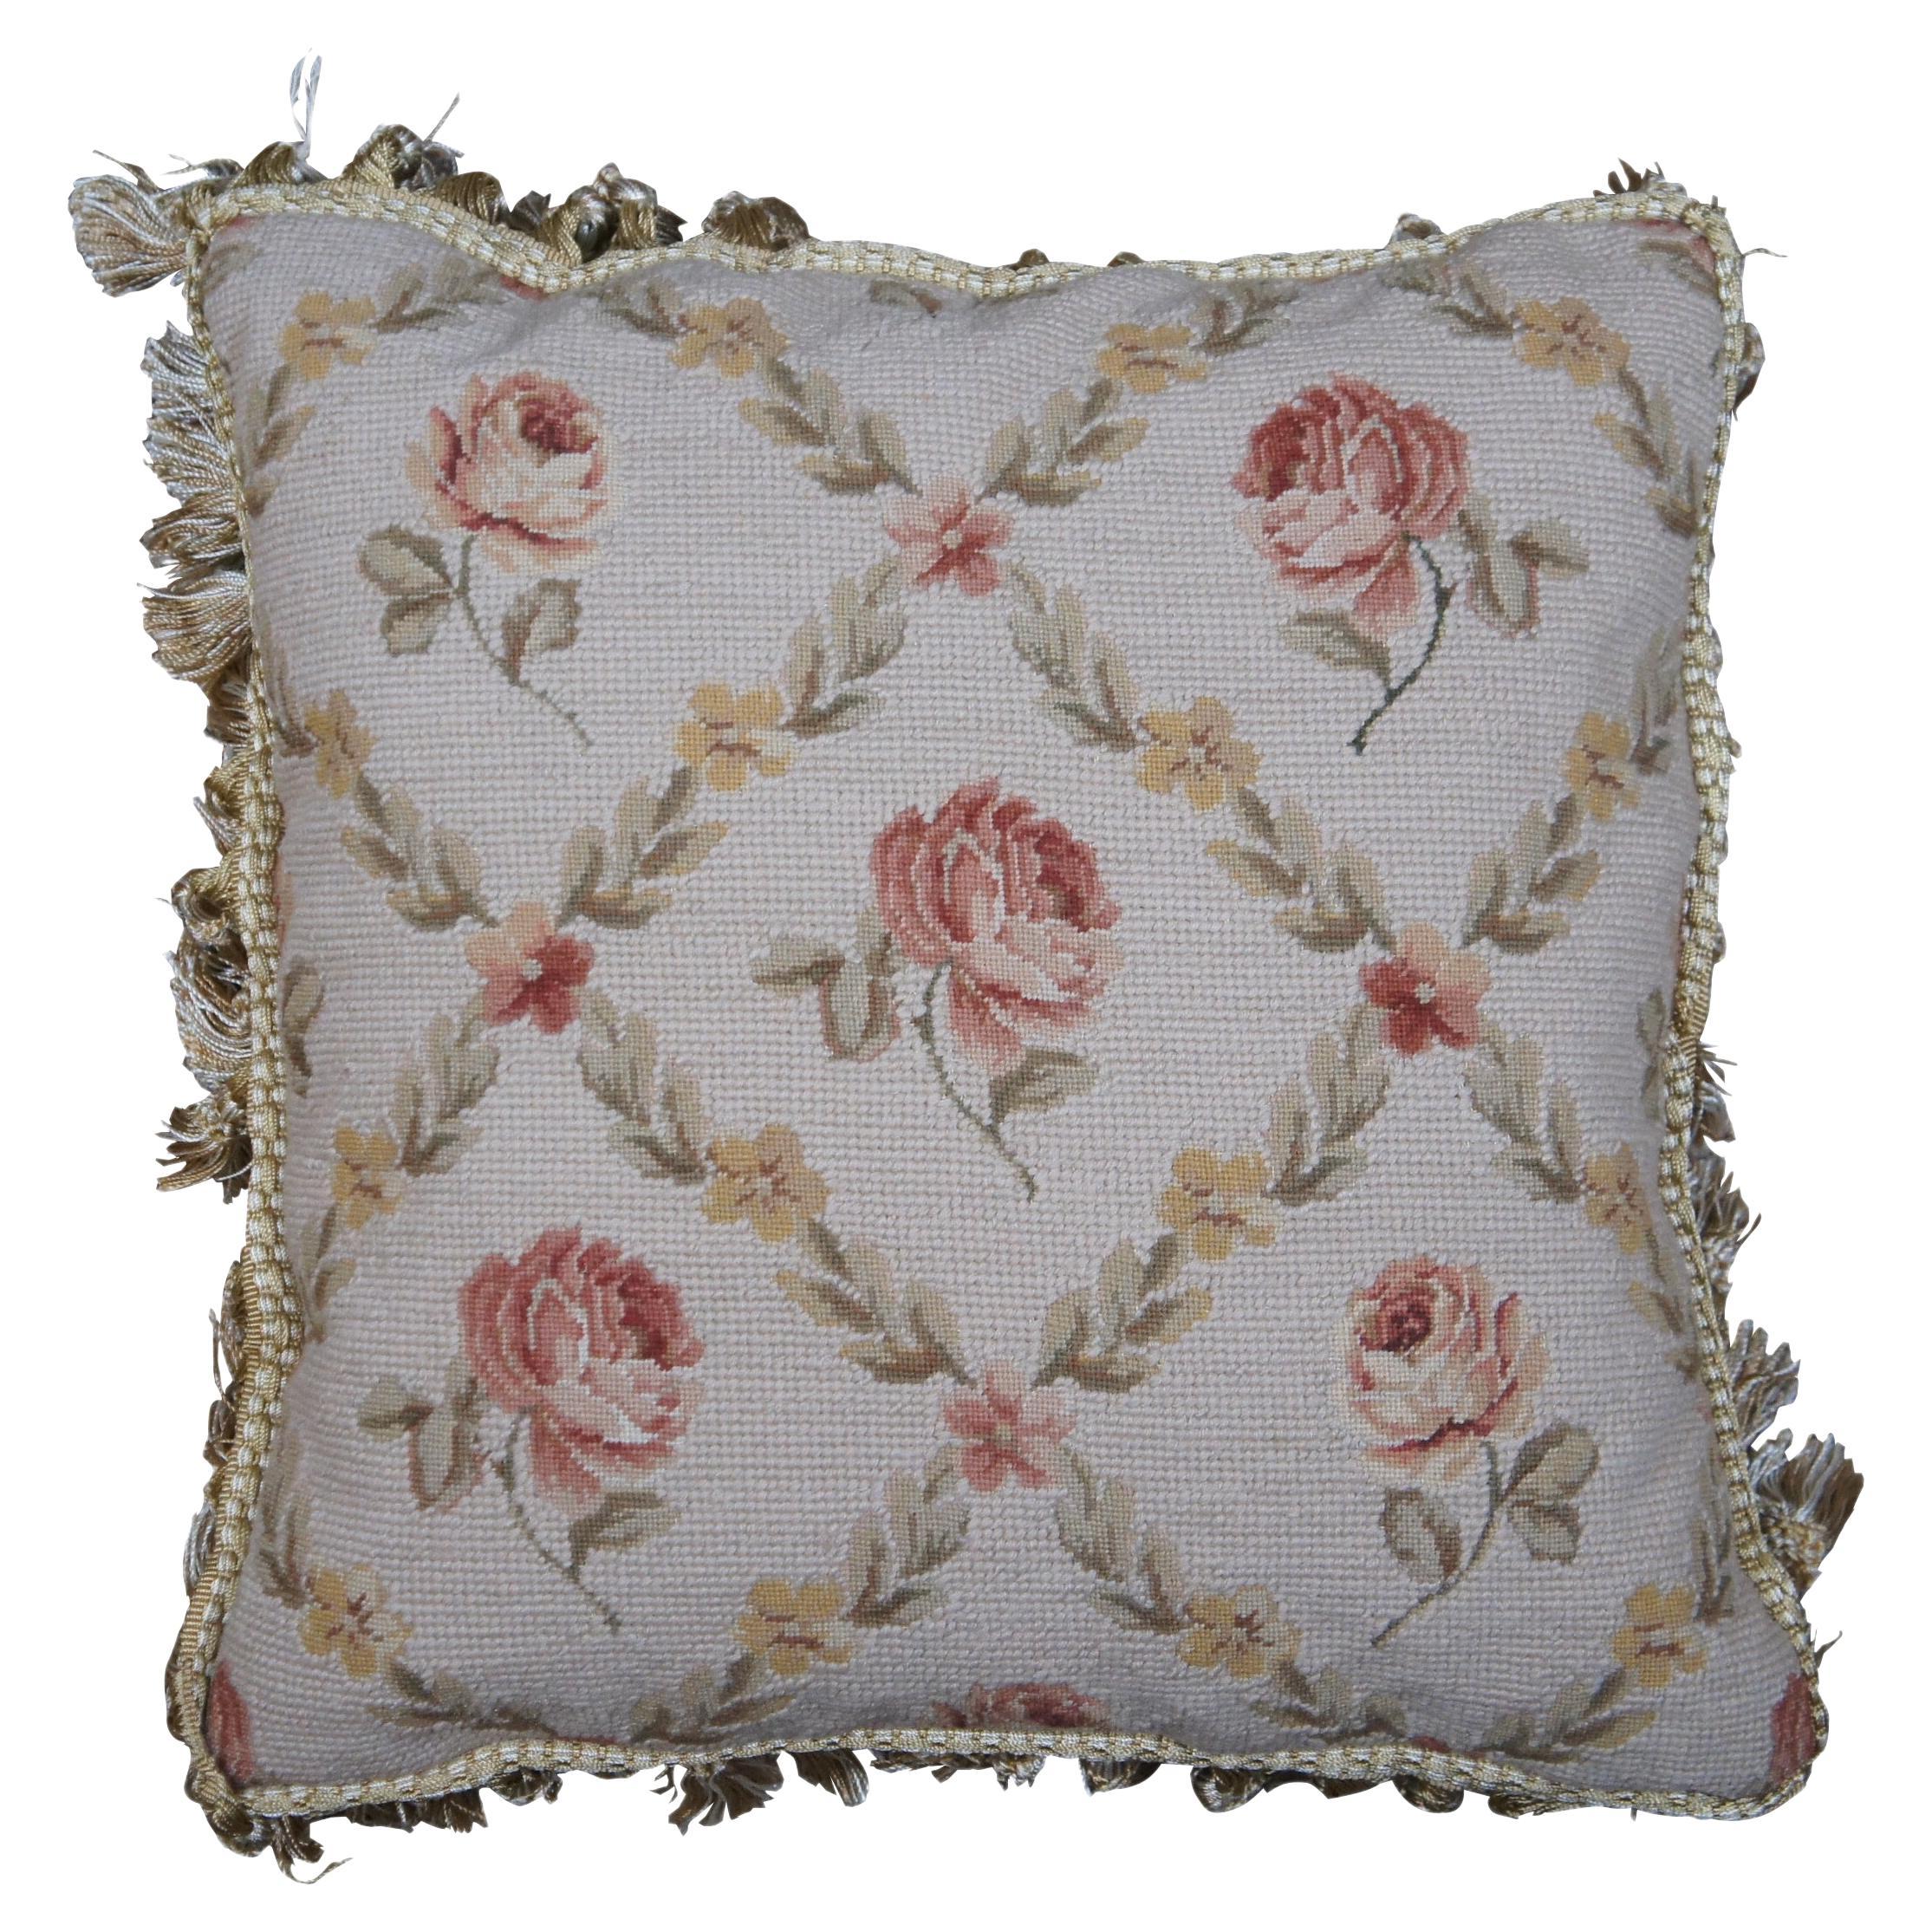 Down Filled Floral Crossed Roses Needlepoint Tassel Lumbar Throw Pillow 16"